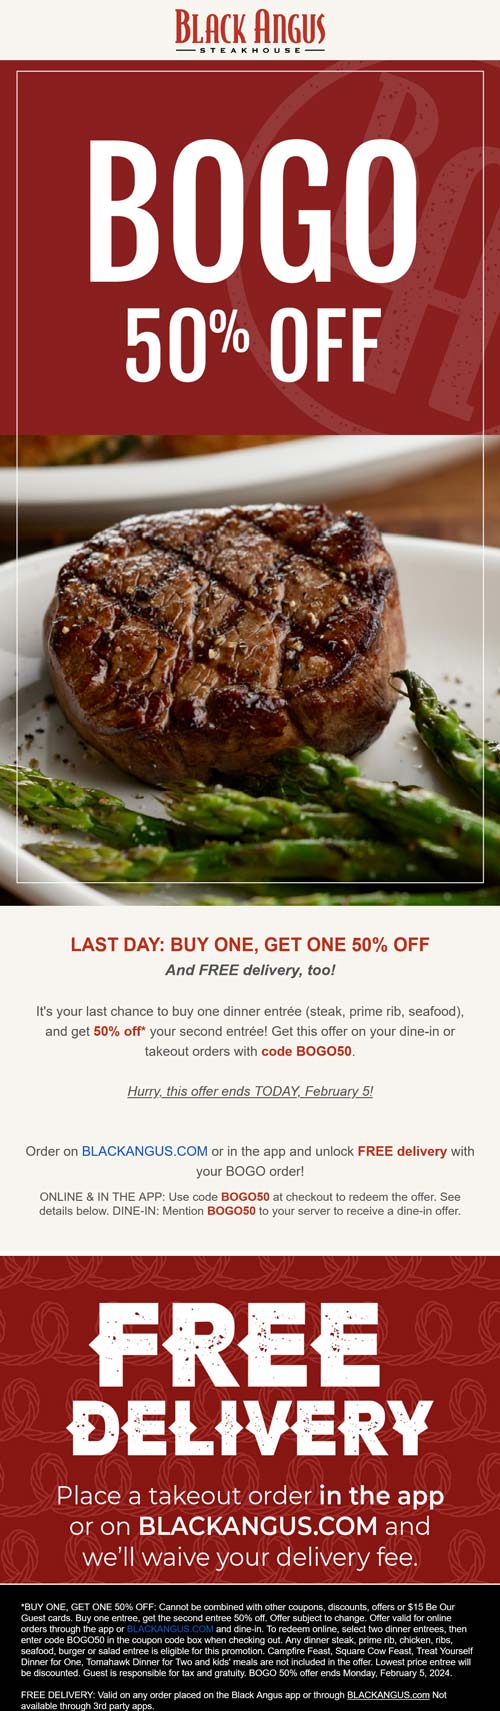 Black Angus restaurants Coupon  Second entree 50% off + free delivery today at Black Angus steakhouse via promo code BOGO50 #blackangus 